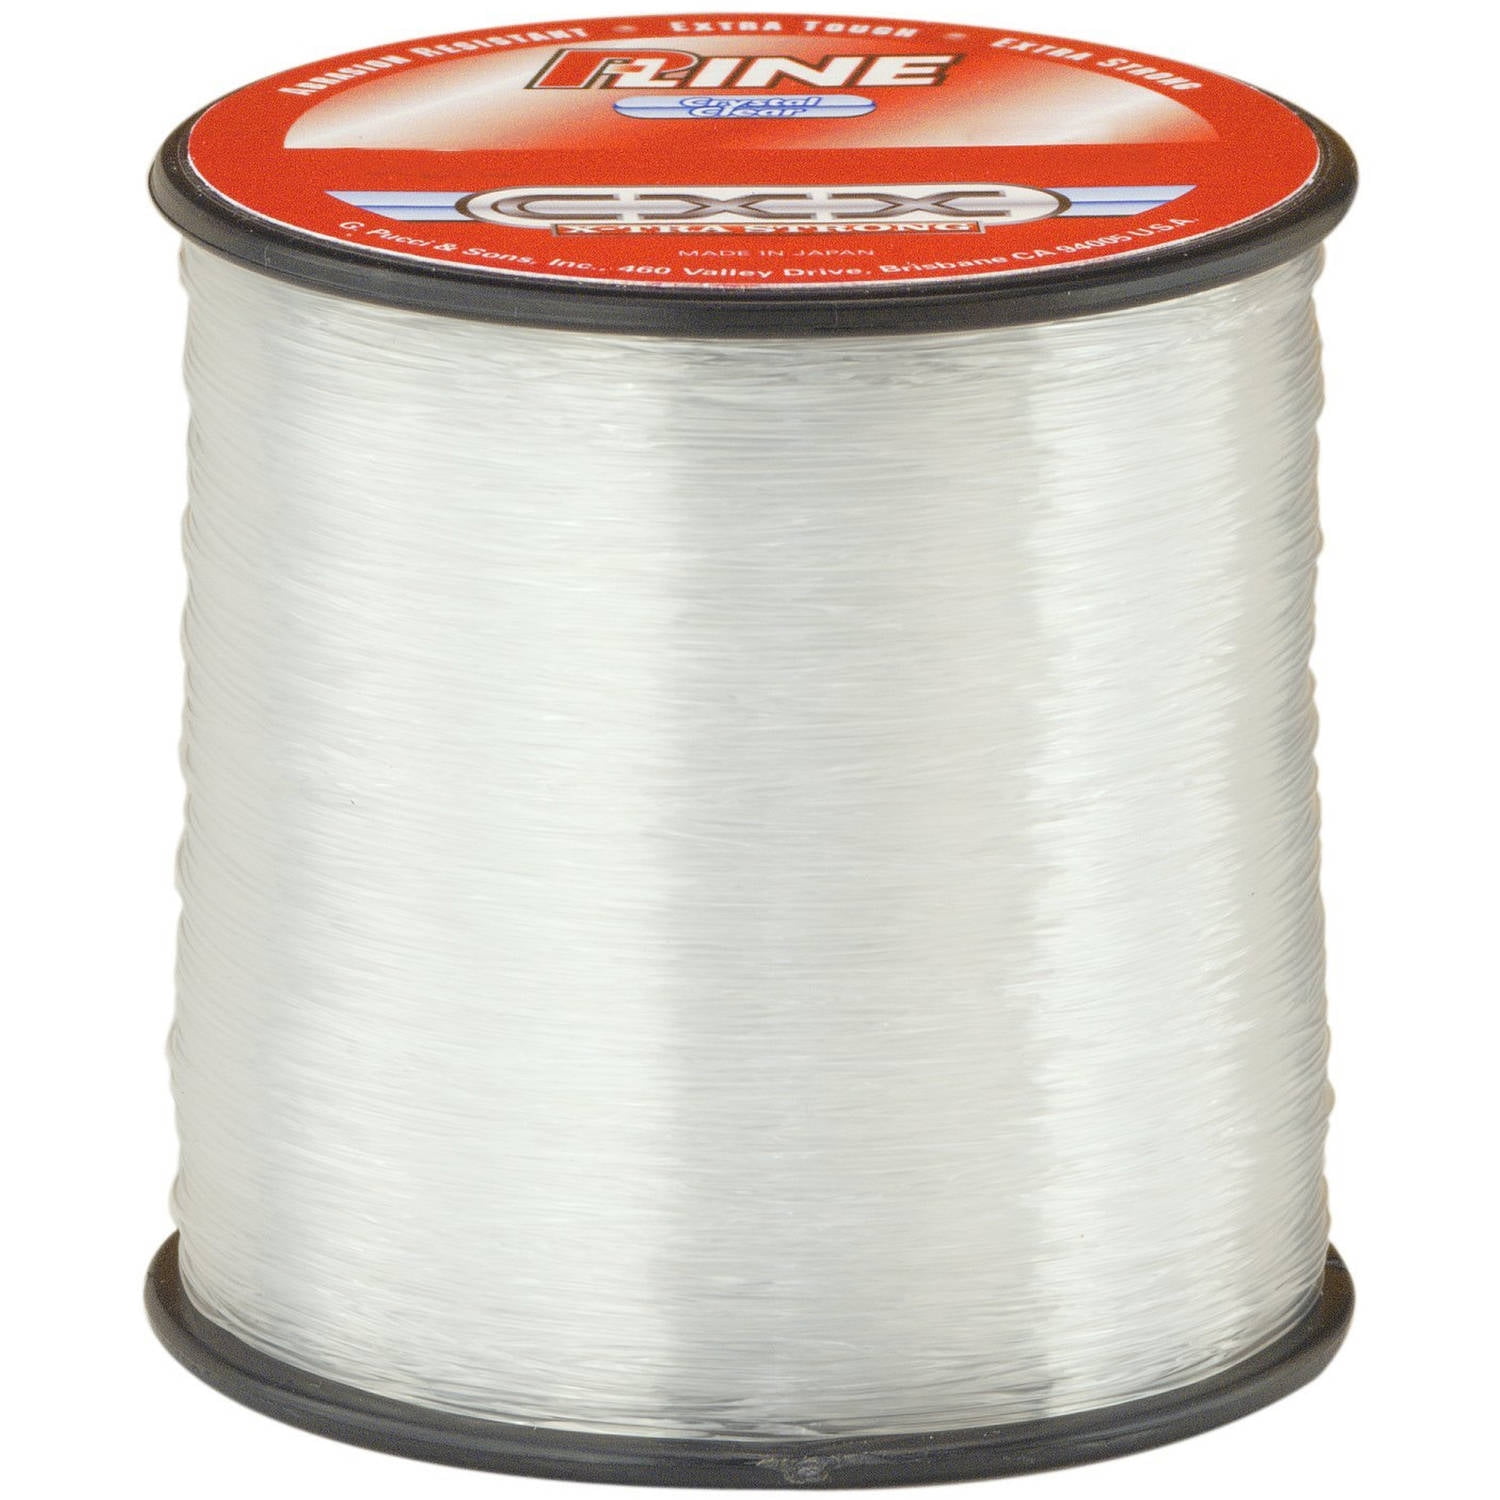 P-Line Cxx-xtra Strong Crystal Clear Mono 600yds for sale online 